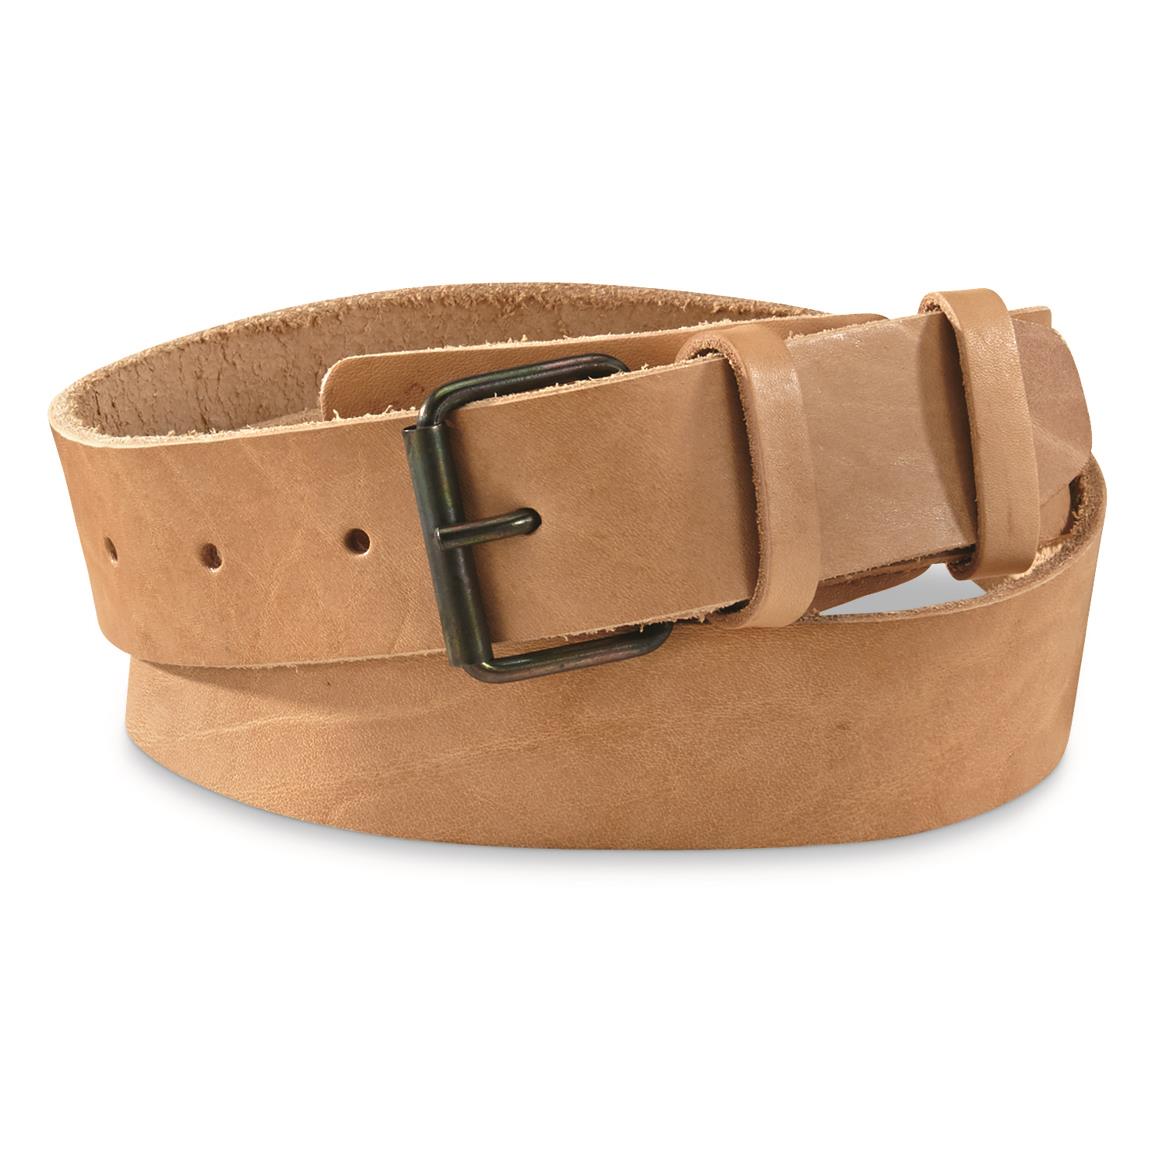 Hungarian Military Surplus Enlisted Leather Belt, New, Tan